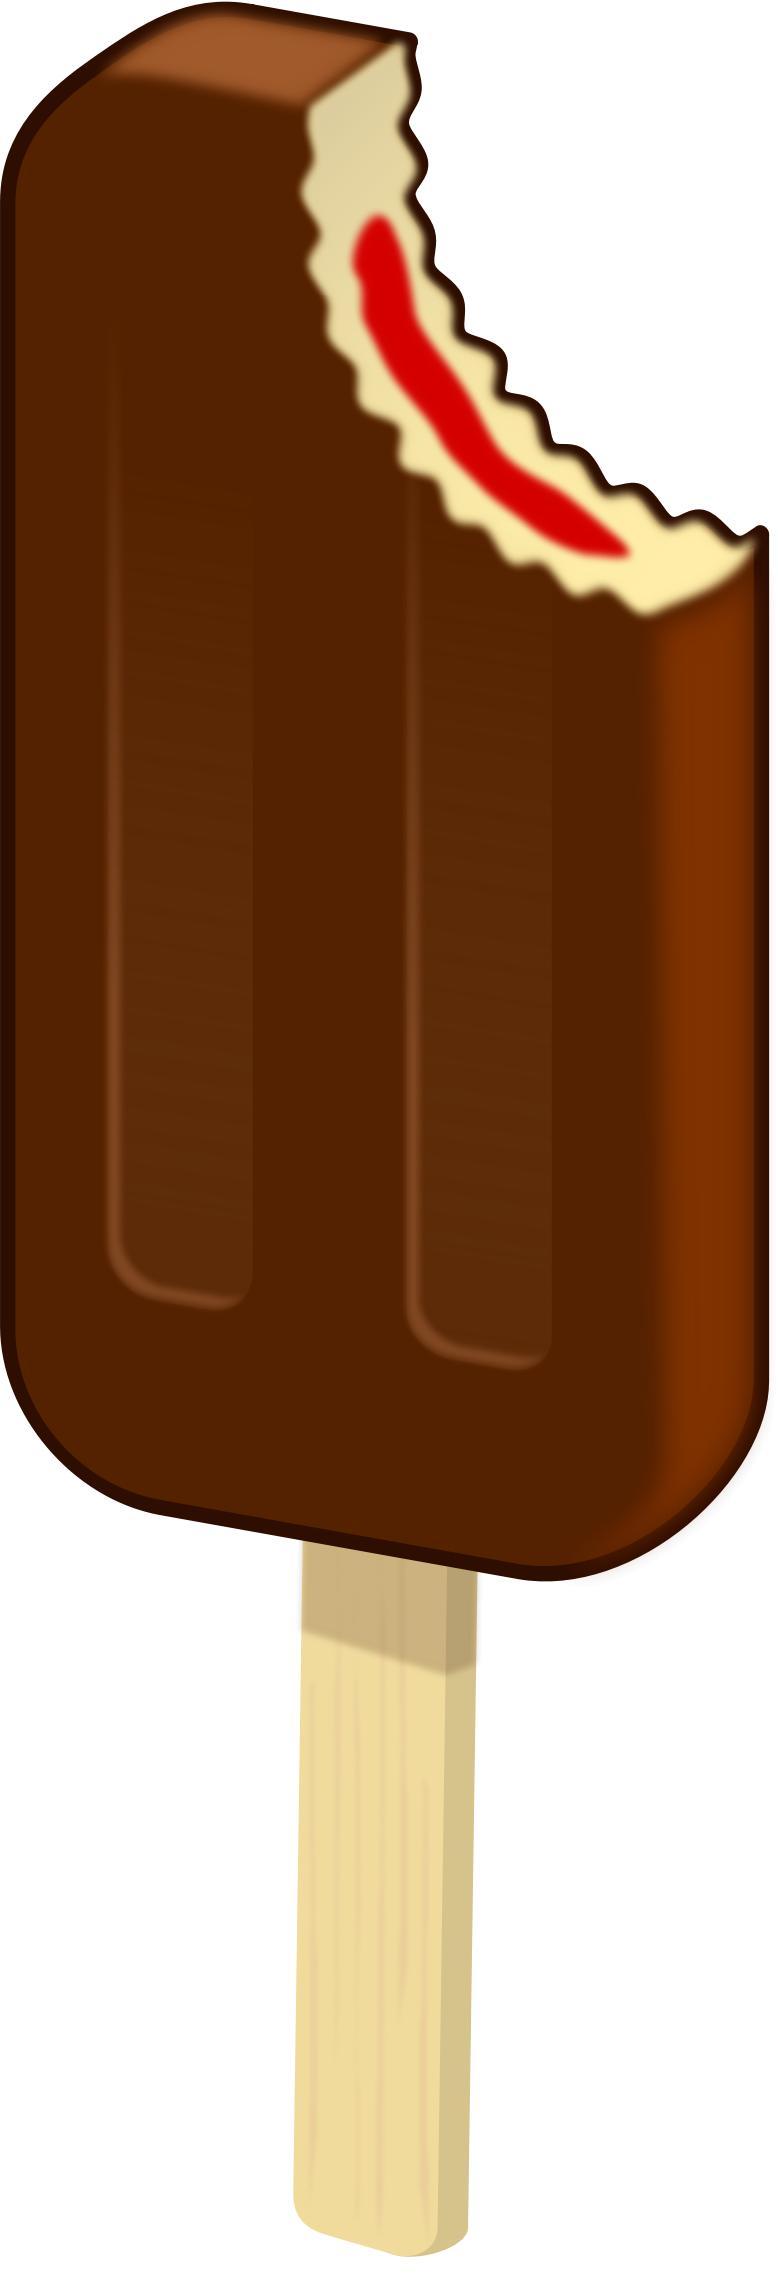 Popsicles Chocolate png transparent